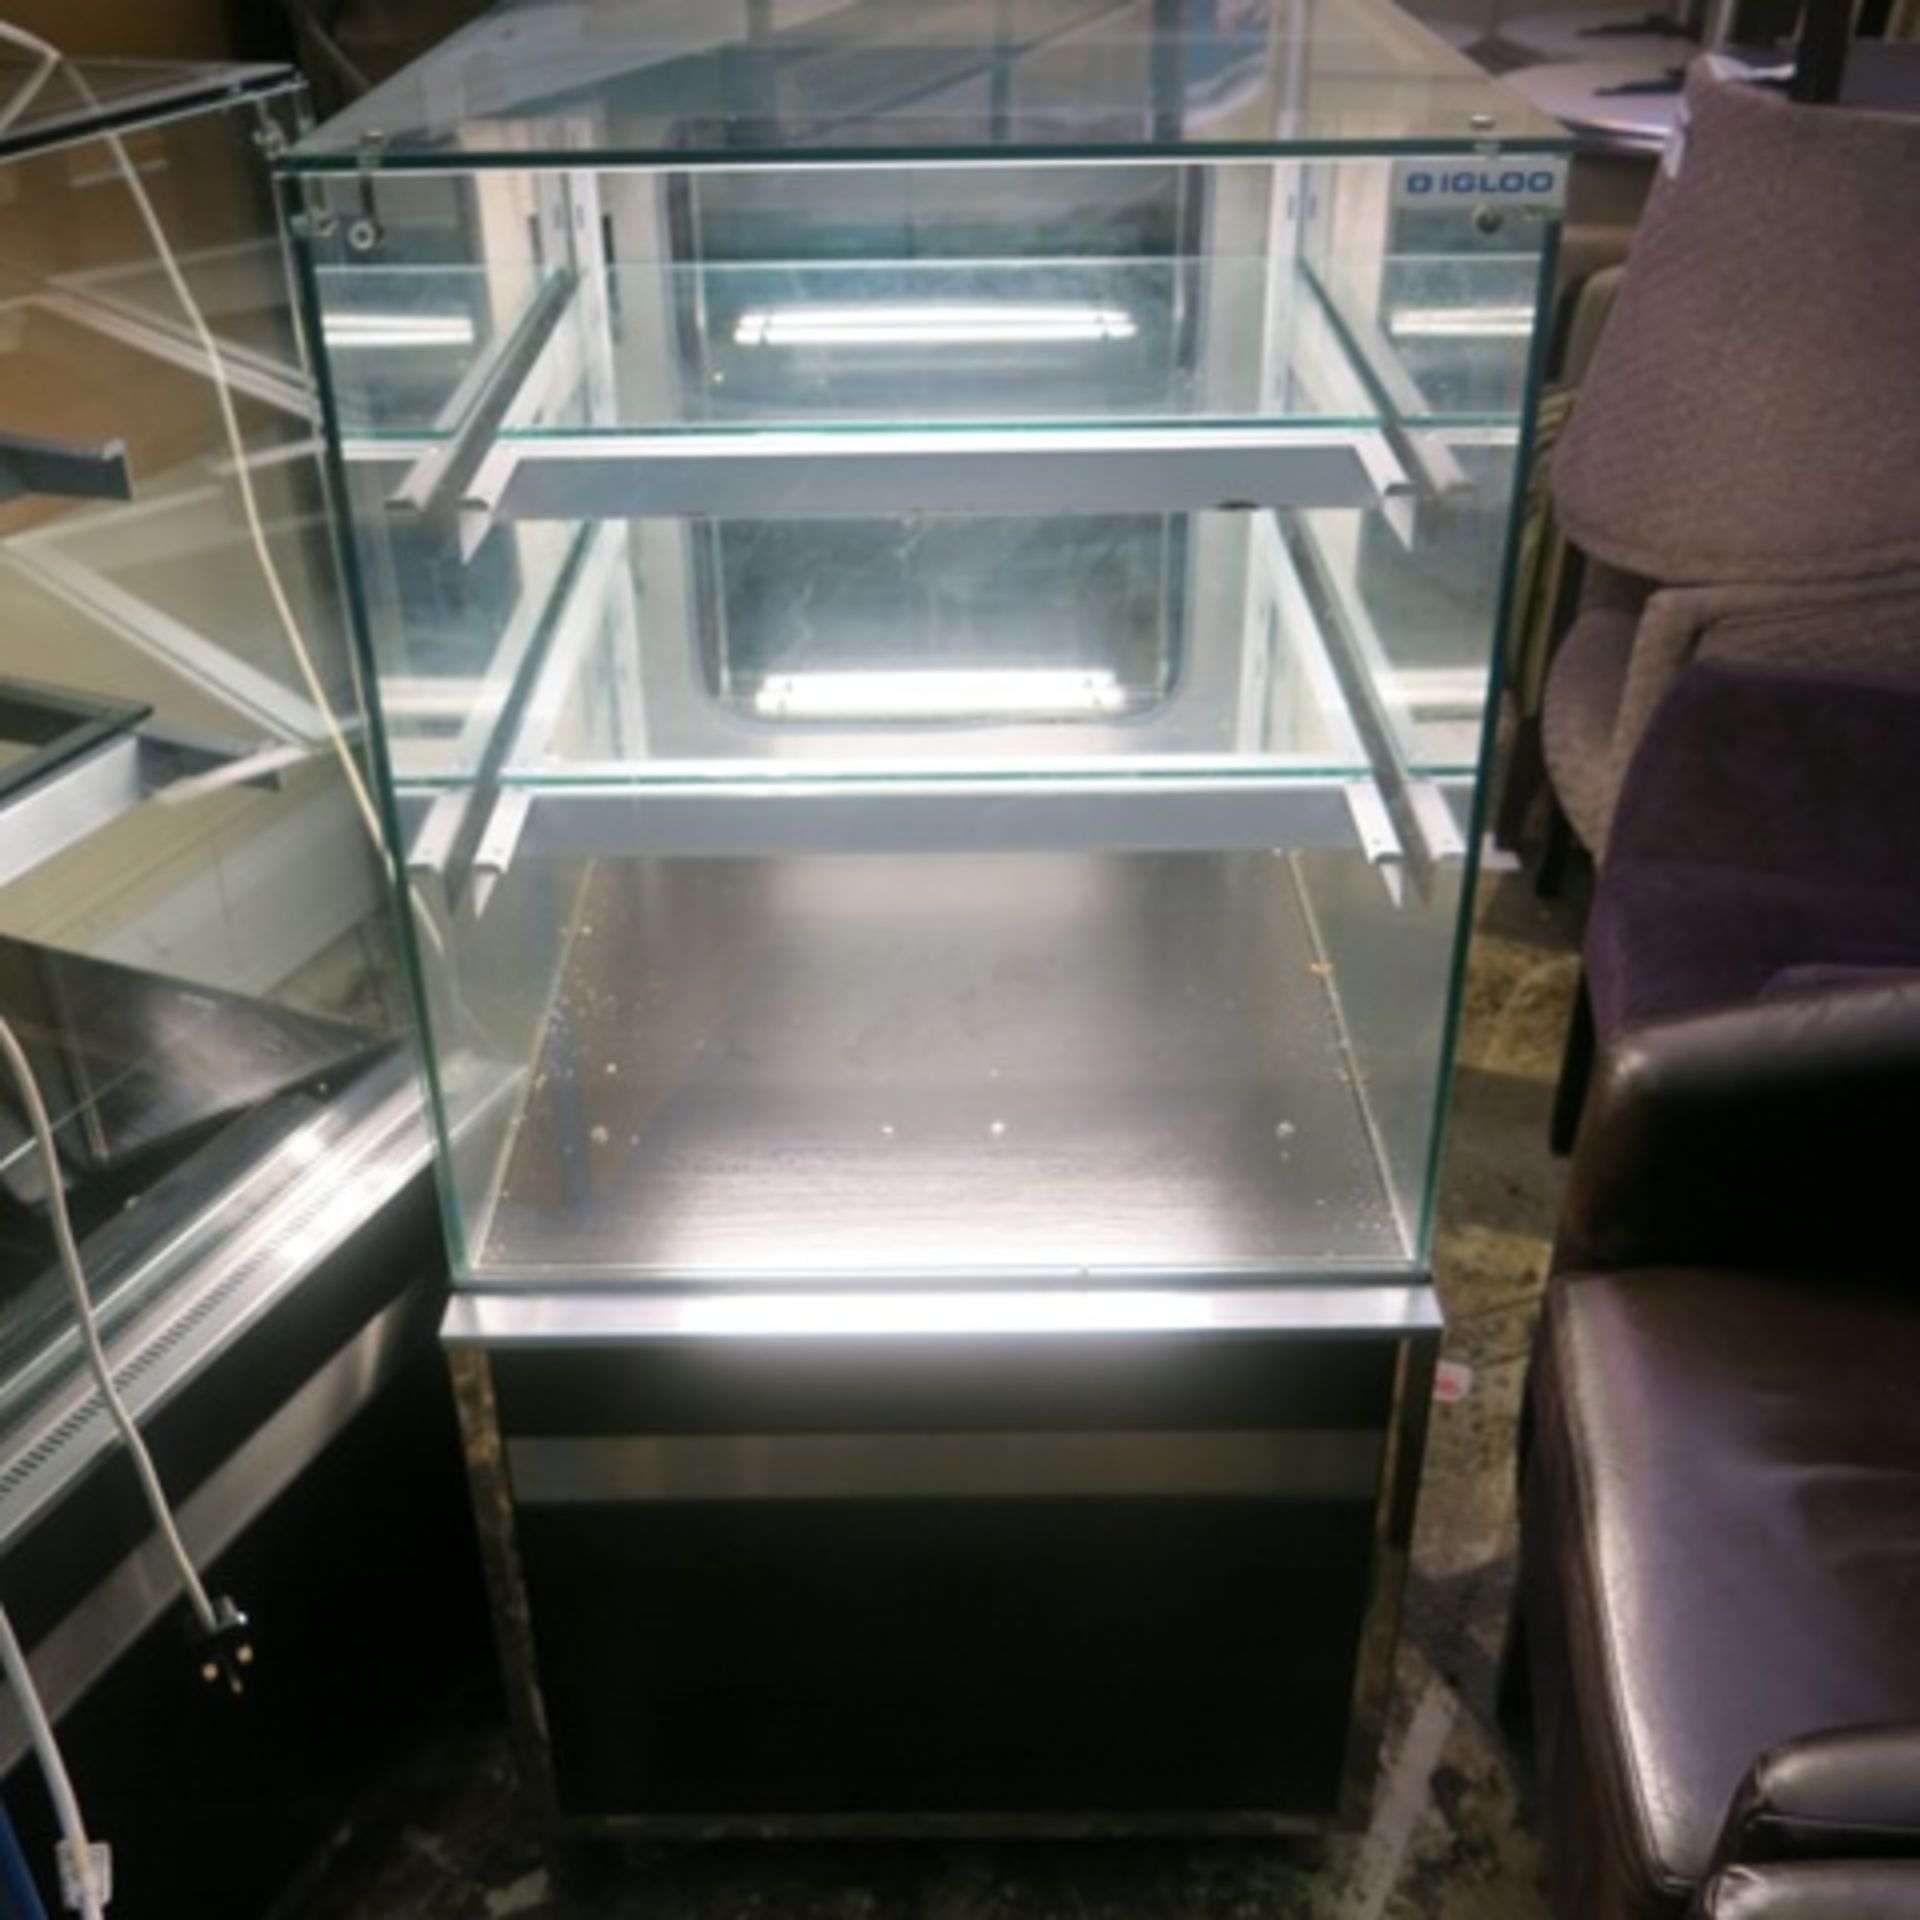 Igloo Refrigerated Glass Display Cabinet with 2 Glass Shelves, Model Gastroline Cube 0.6W. Size (H) - Image 3 of 10